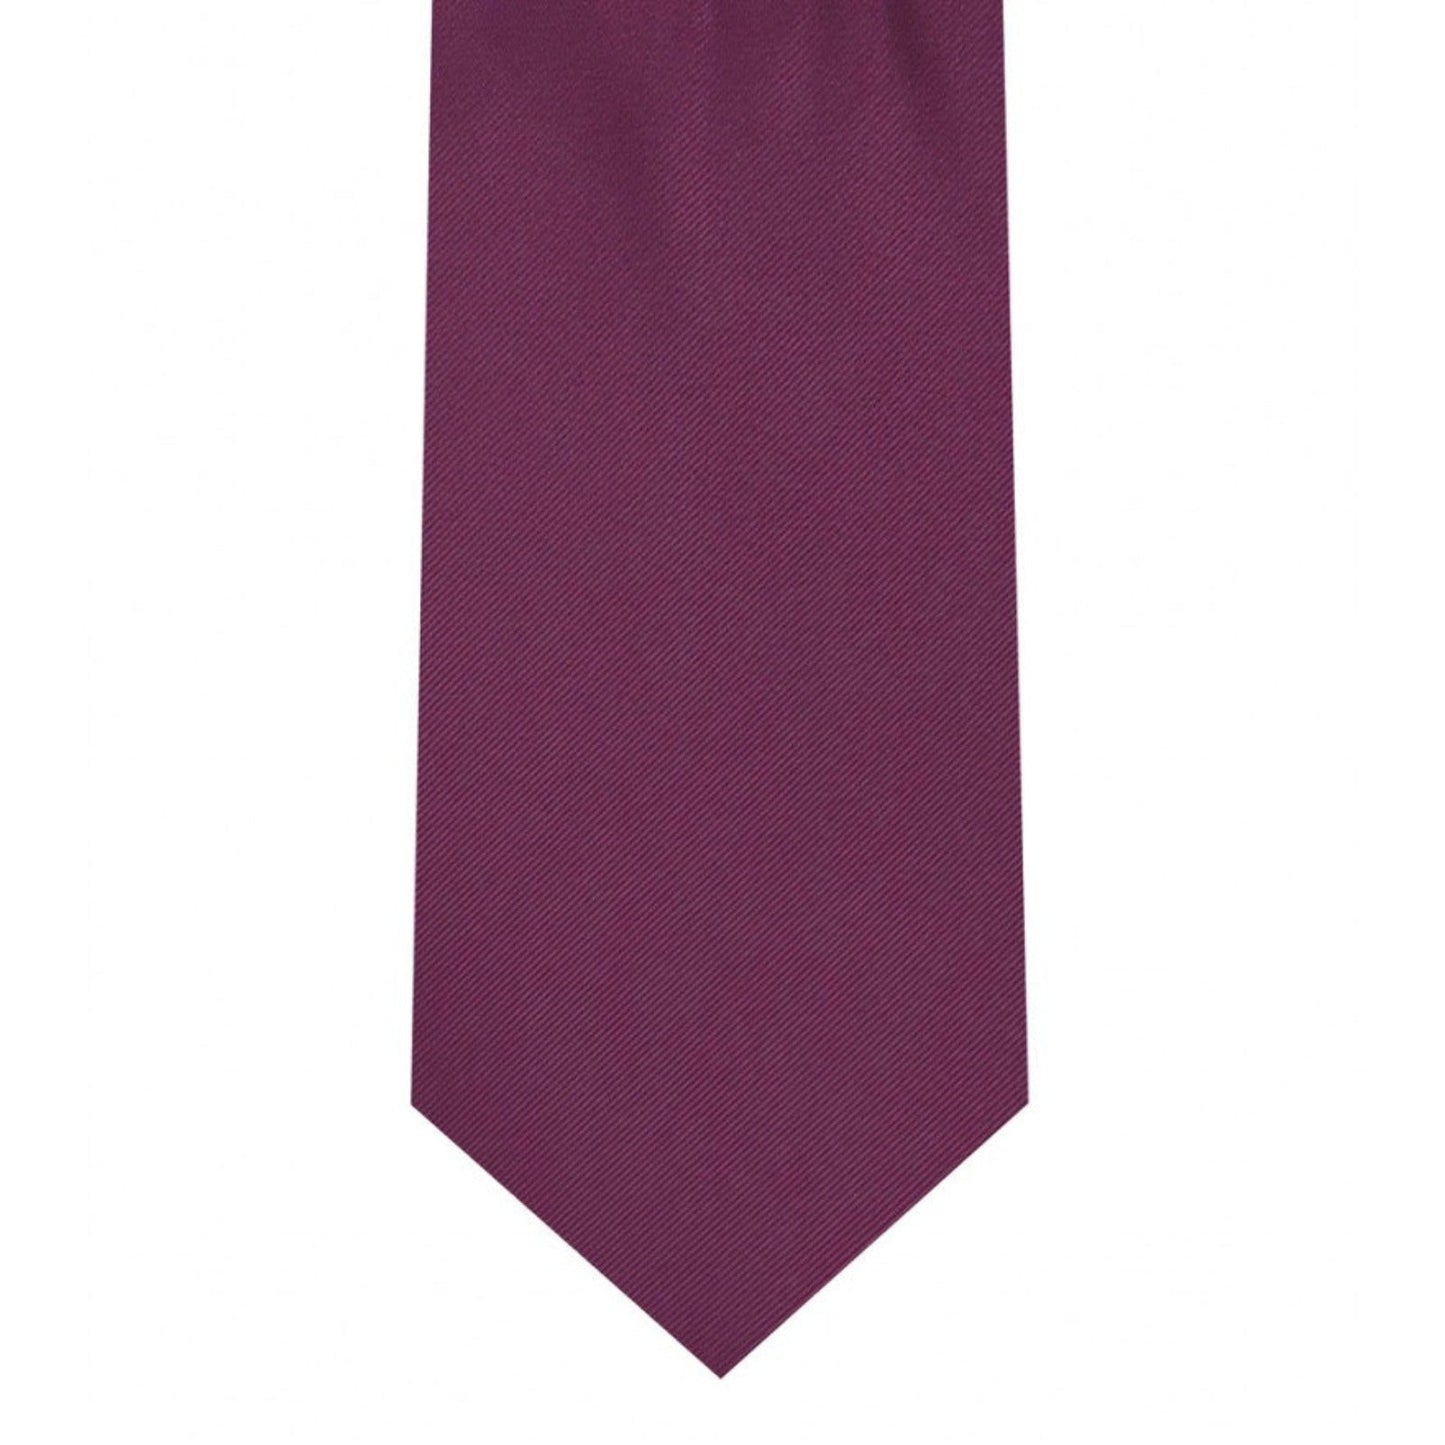 Classic Magenta Tie Skinny width 2.75 inches With Matching Pocket Square | KCT Menswear 